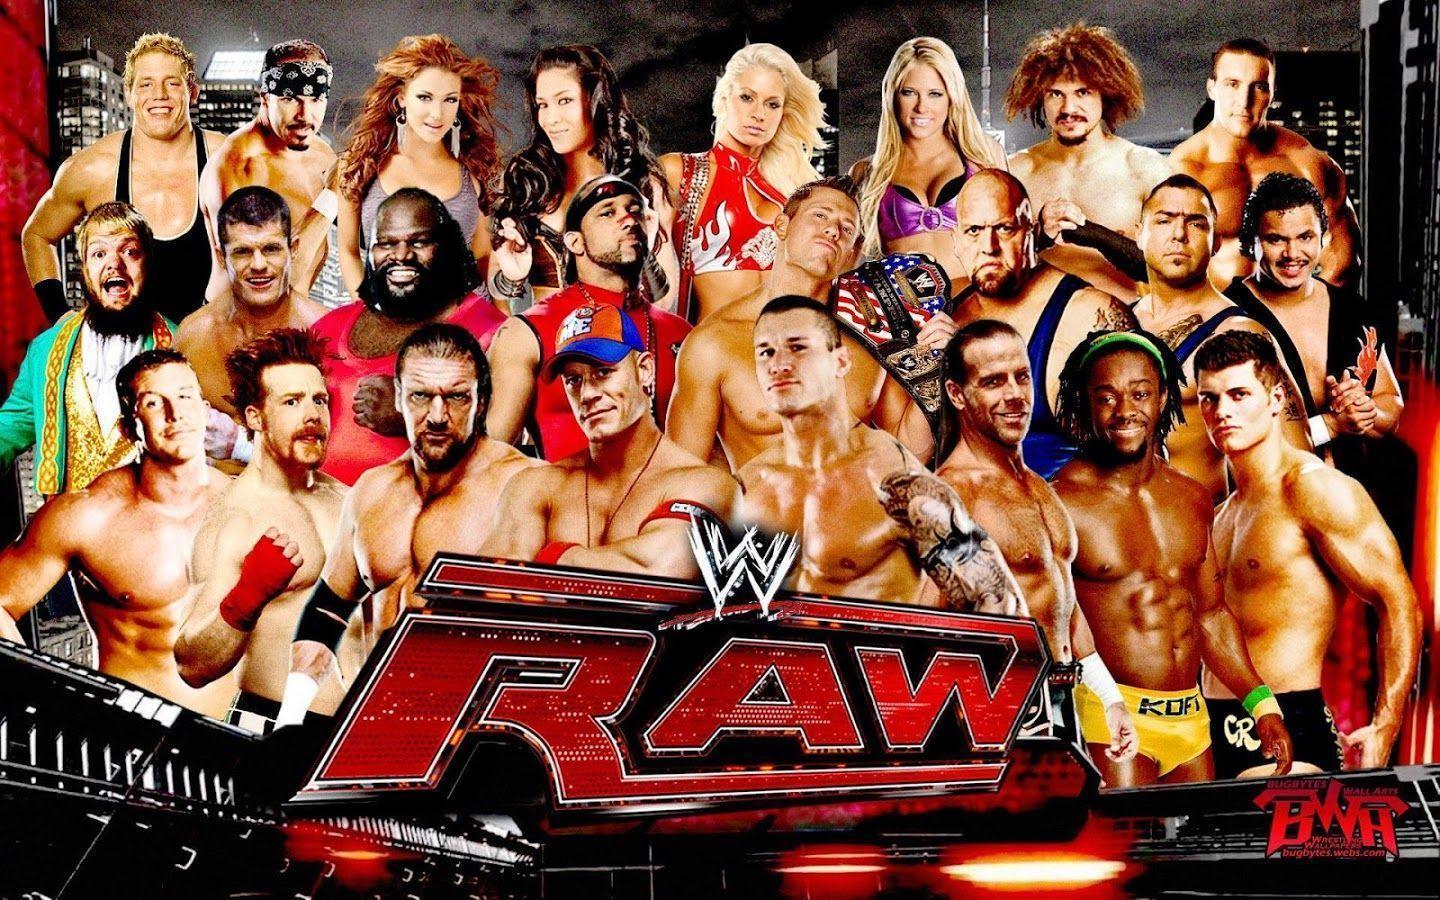 Best Of WWE 2014 Wallpaper for (Android) Free Download on MoboMarket